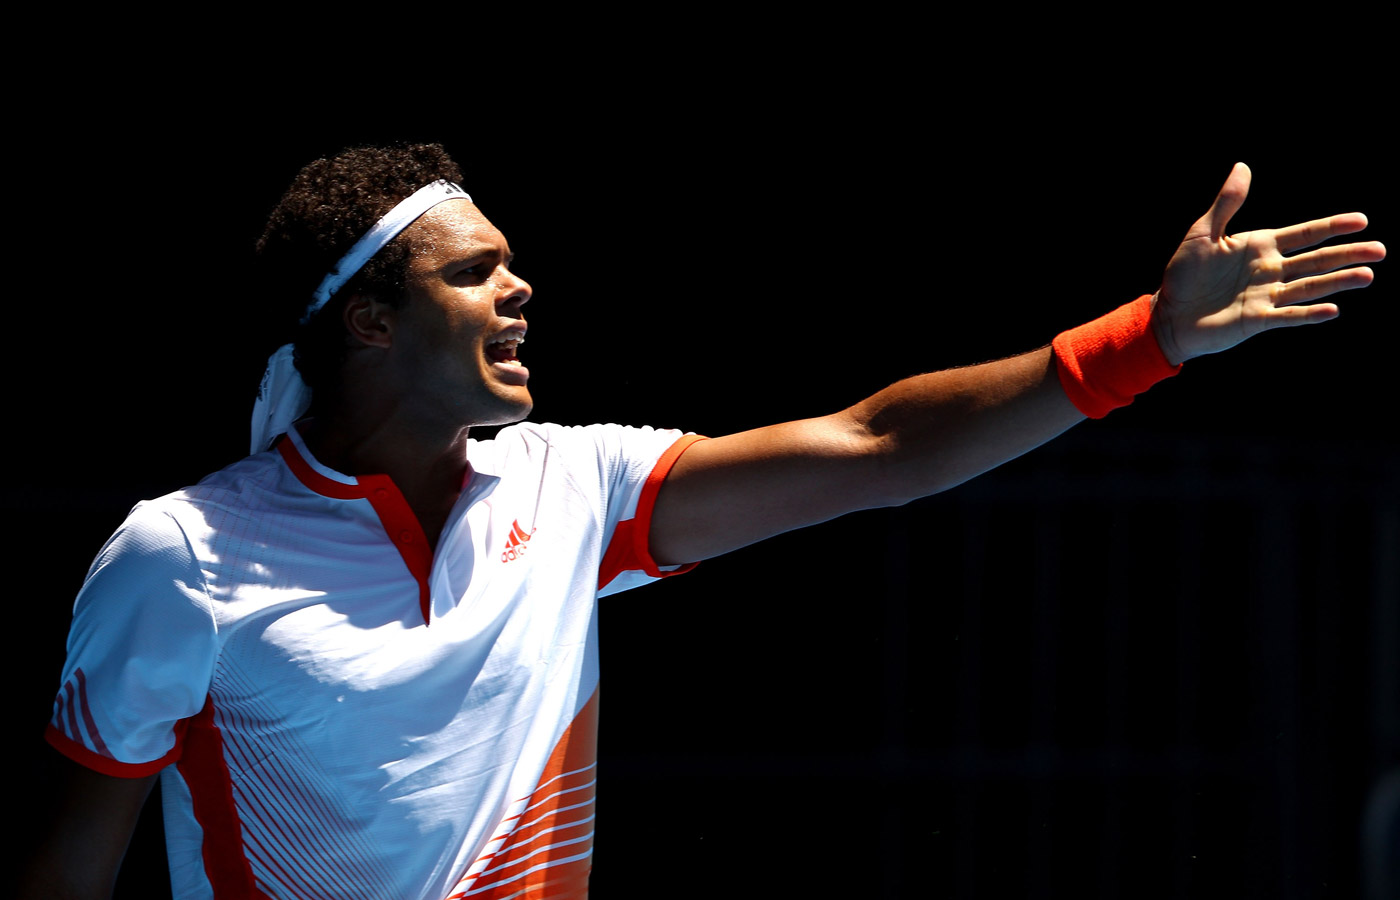 Search Great Tennis Wallpapers: Jo Wilfred Tsonga Best Wallpapers 2012